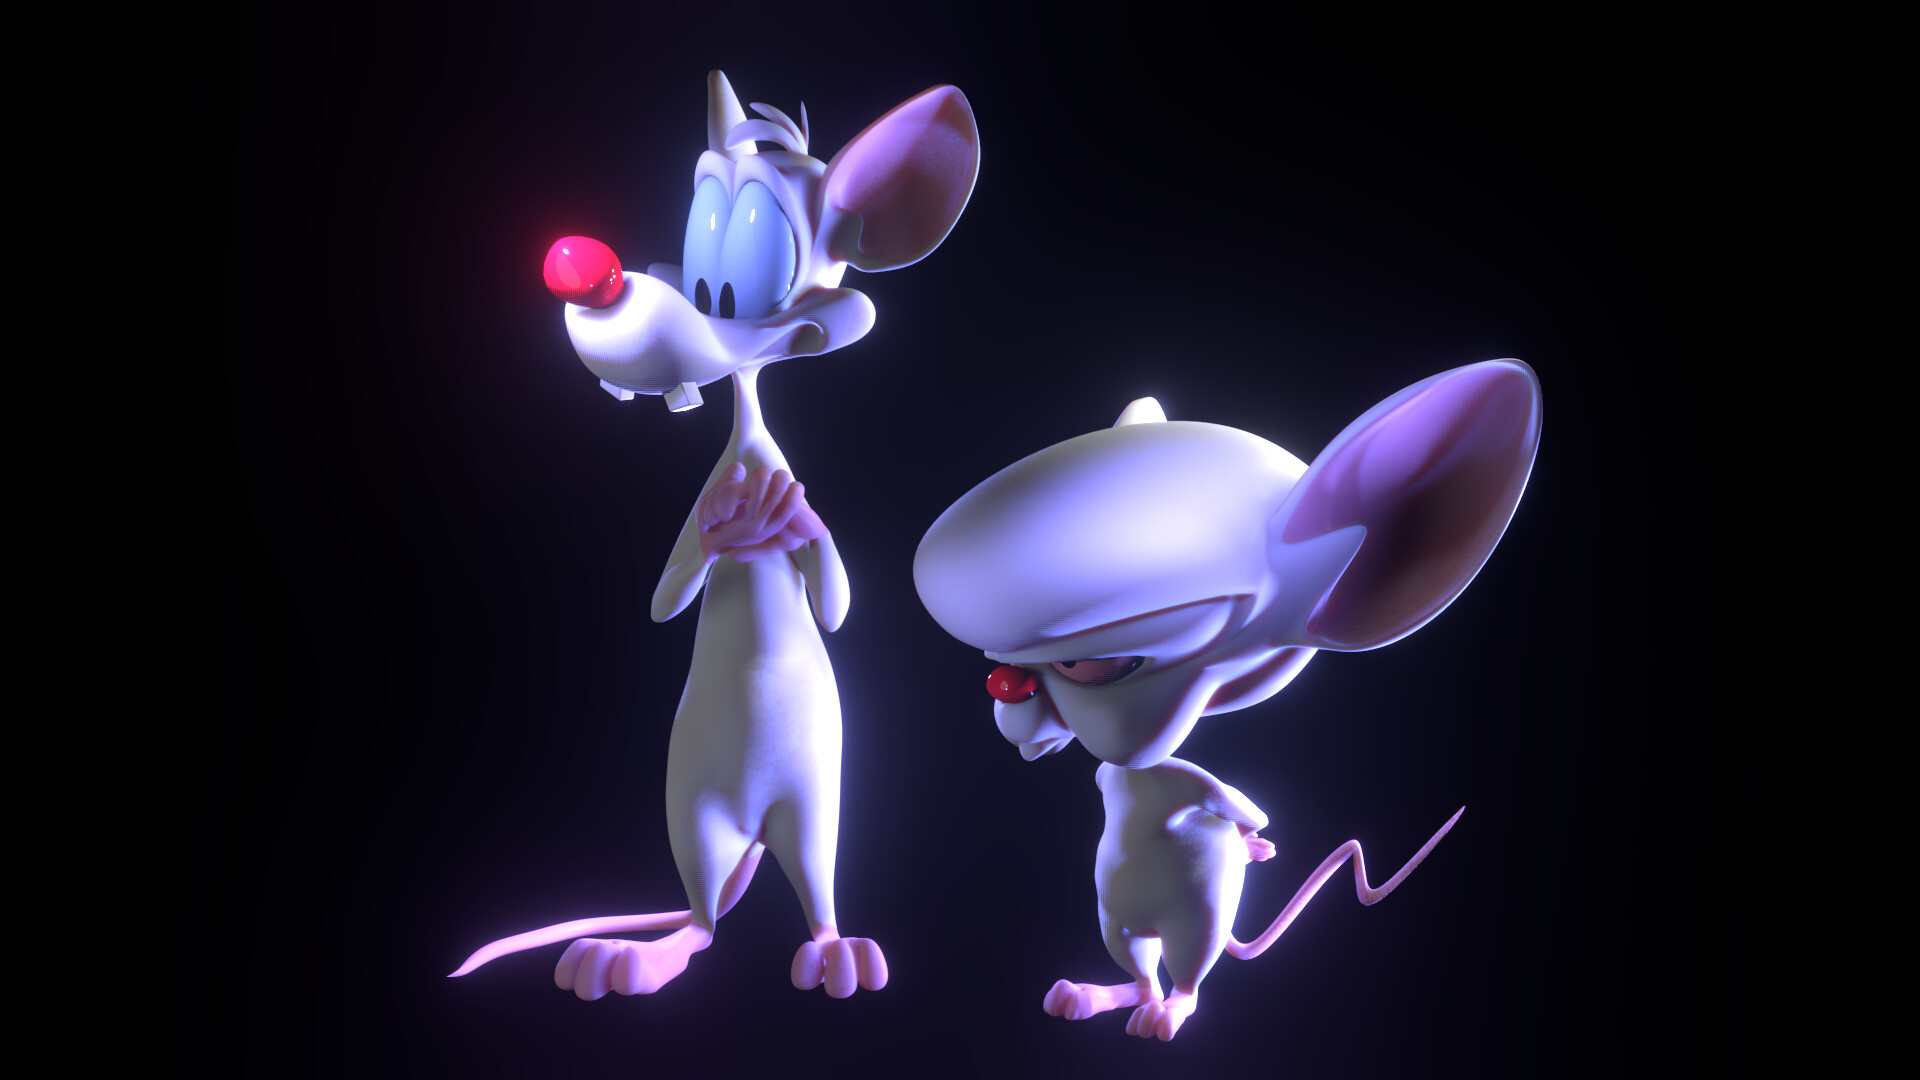 ArtStation - pinky and the brain 1920x1080